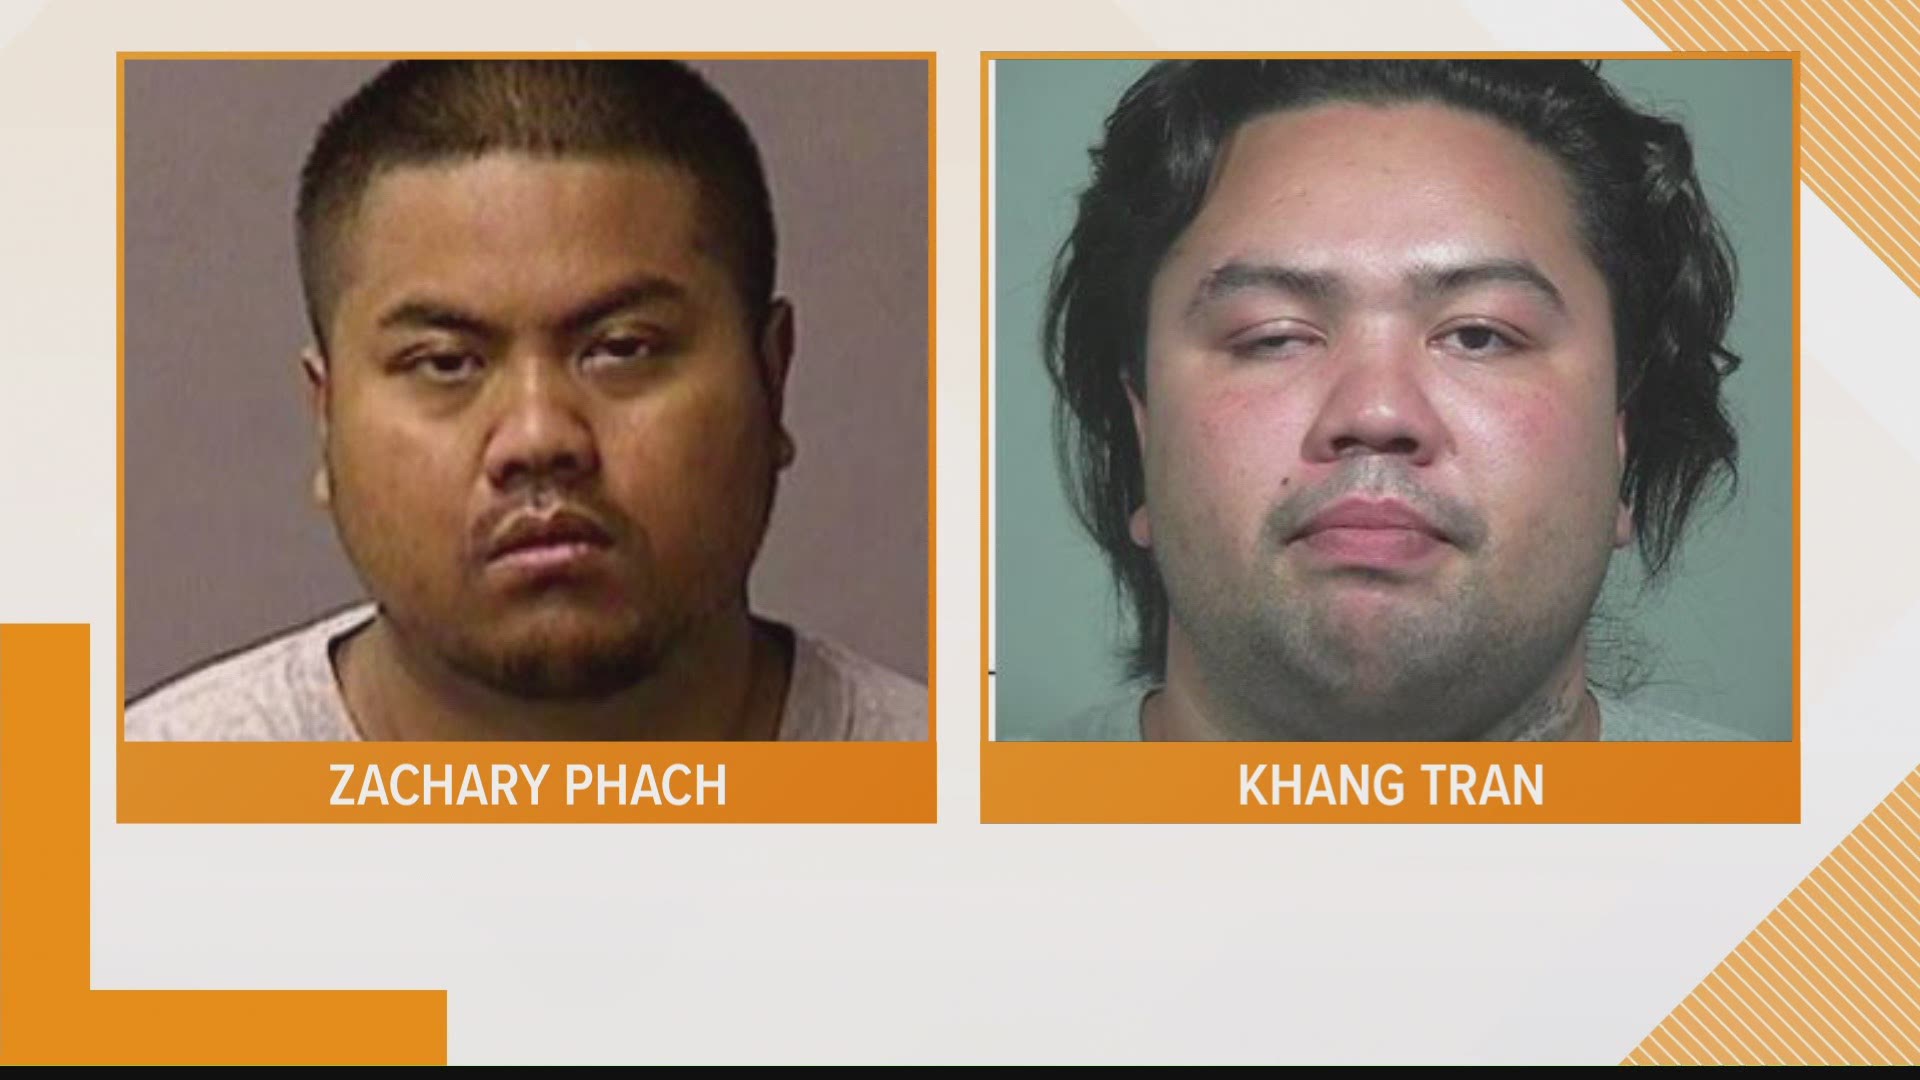 Based on evidence gathered by Portland police, two people, Zachary Phach and Khang Tran, were indicted earlier this month on murder charges.